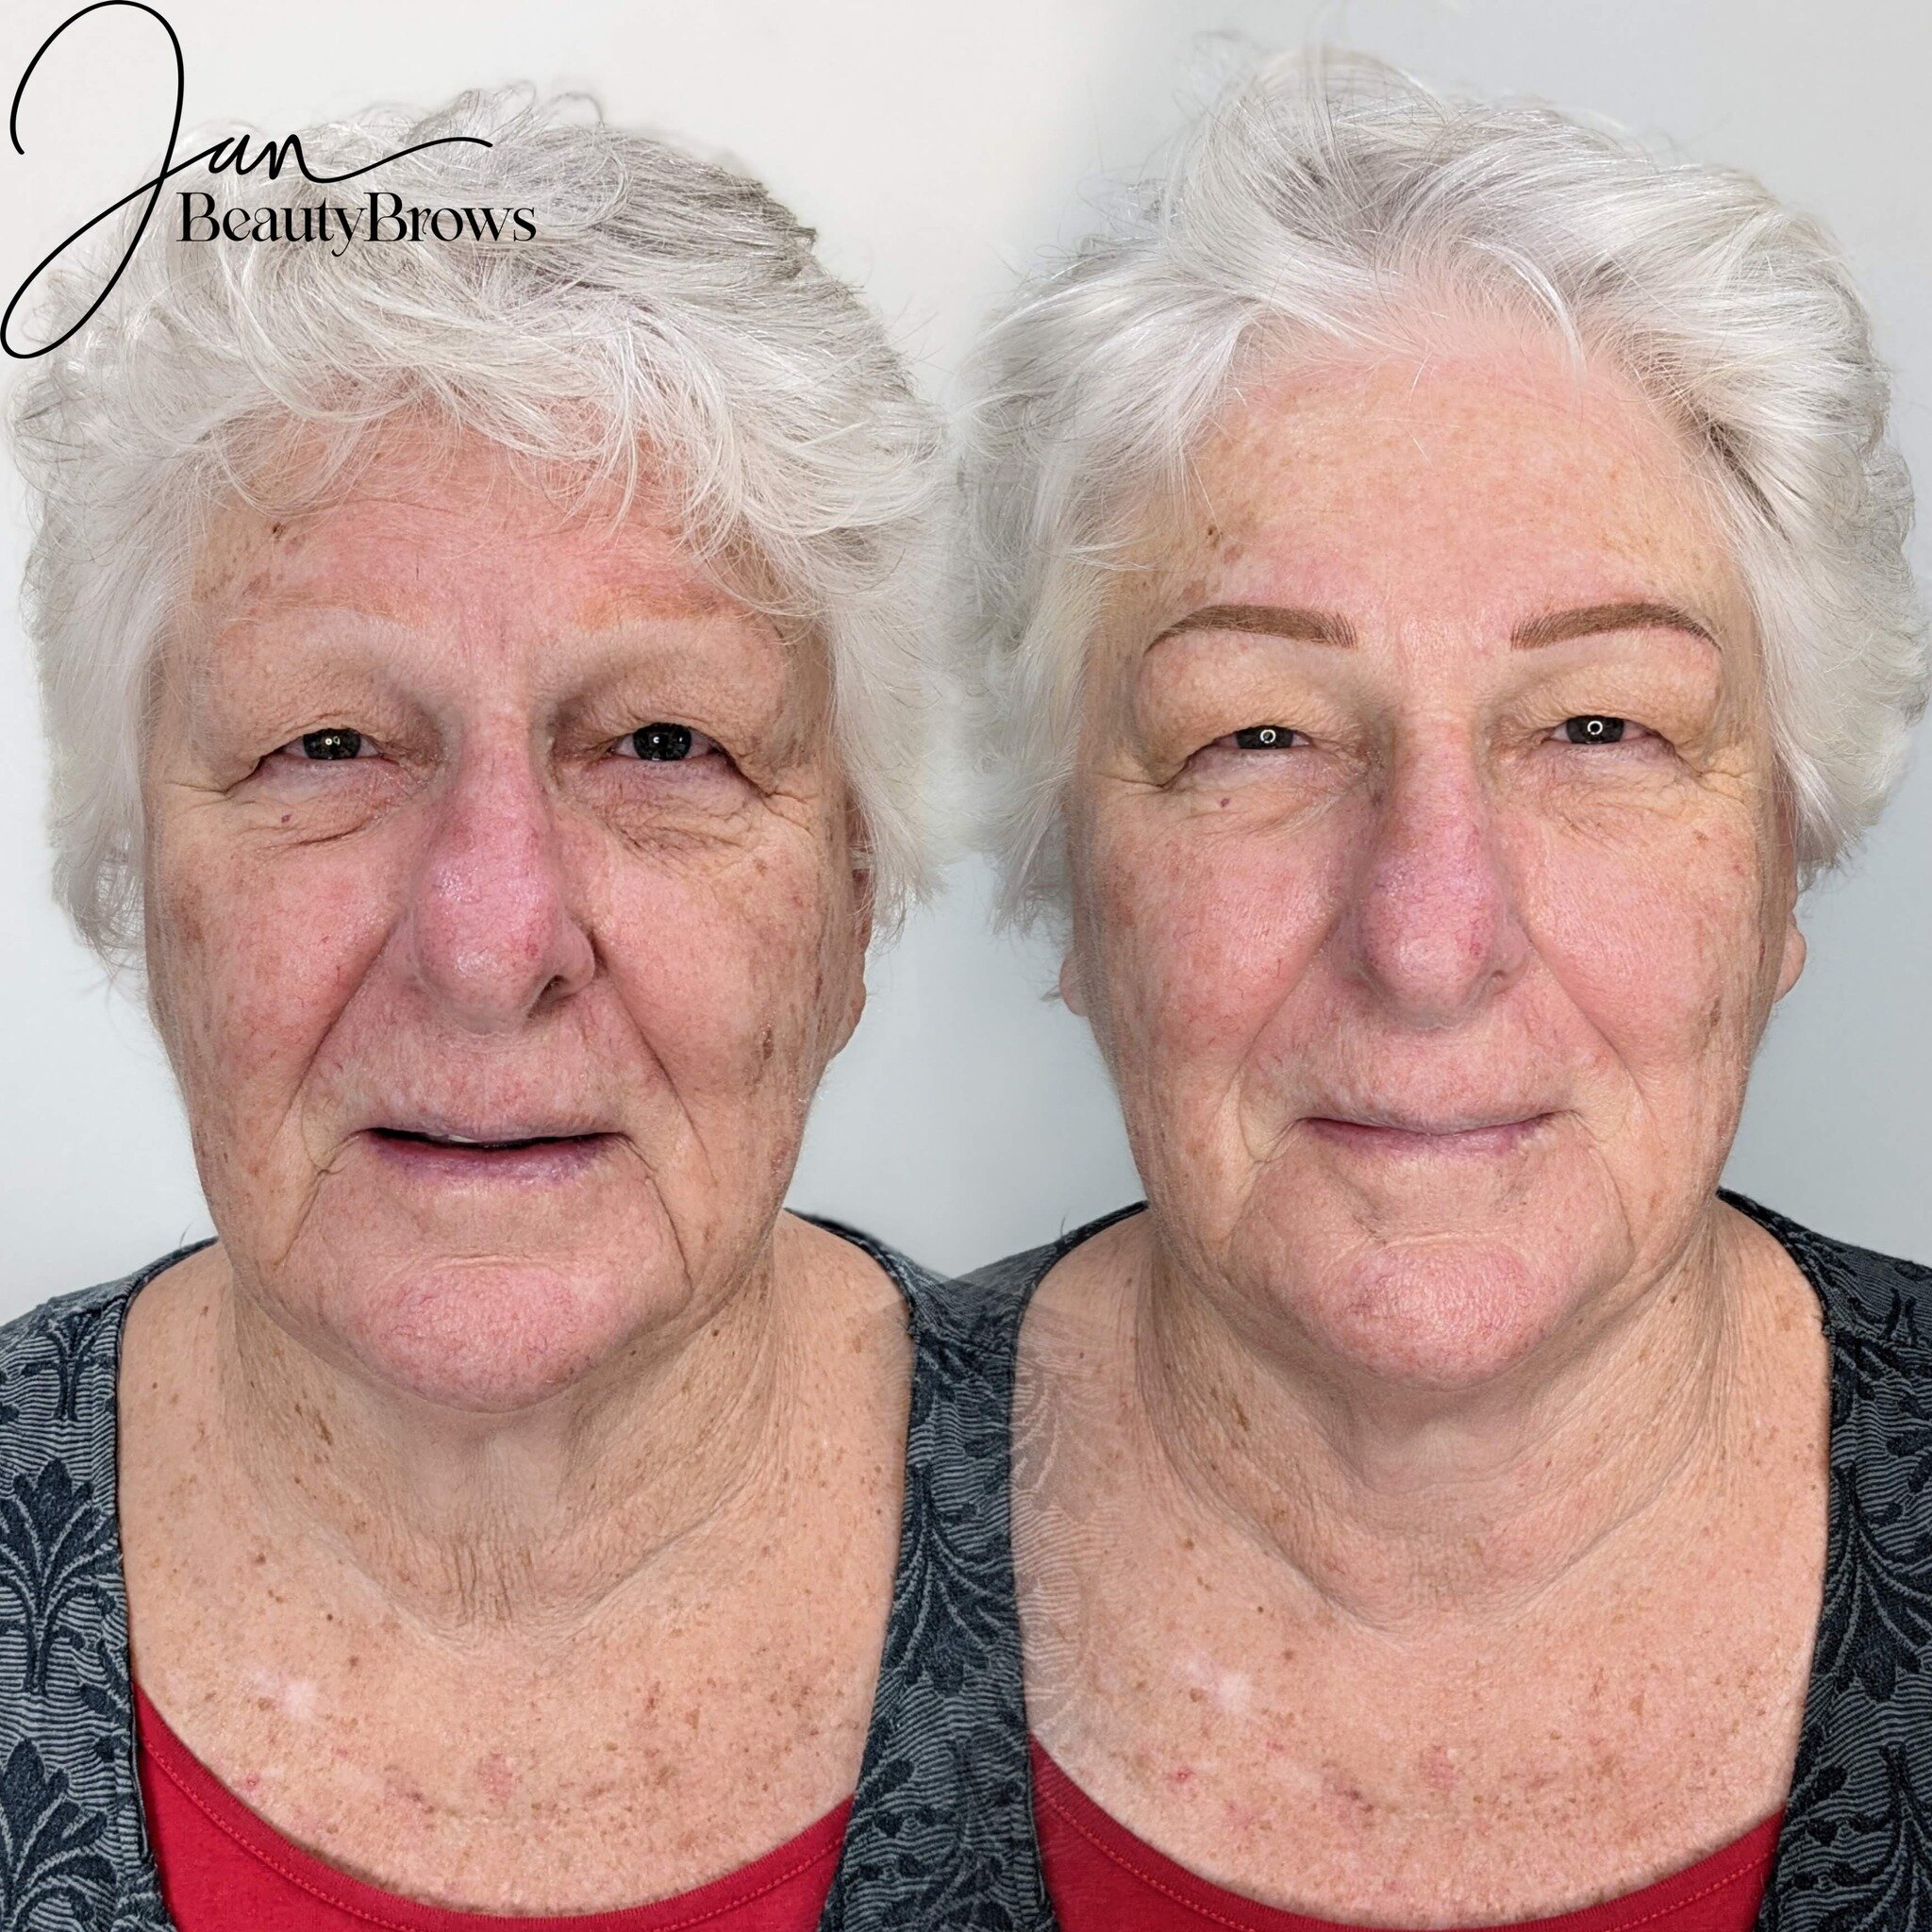 A beautiful defined brow will build your confidence and give you a more youthful appearance.🥰🥰
 #beforeandafter #brows #eyebrowshaping #beauty #beautymakeup #beautychallenge #beautytips #beforeandafter #beforeafter #eyebrows #TattooArt #eyebrowsonf